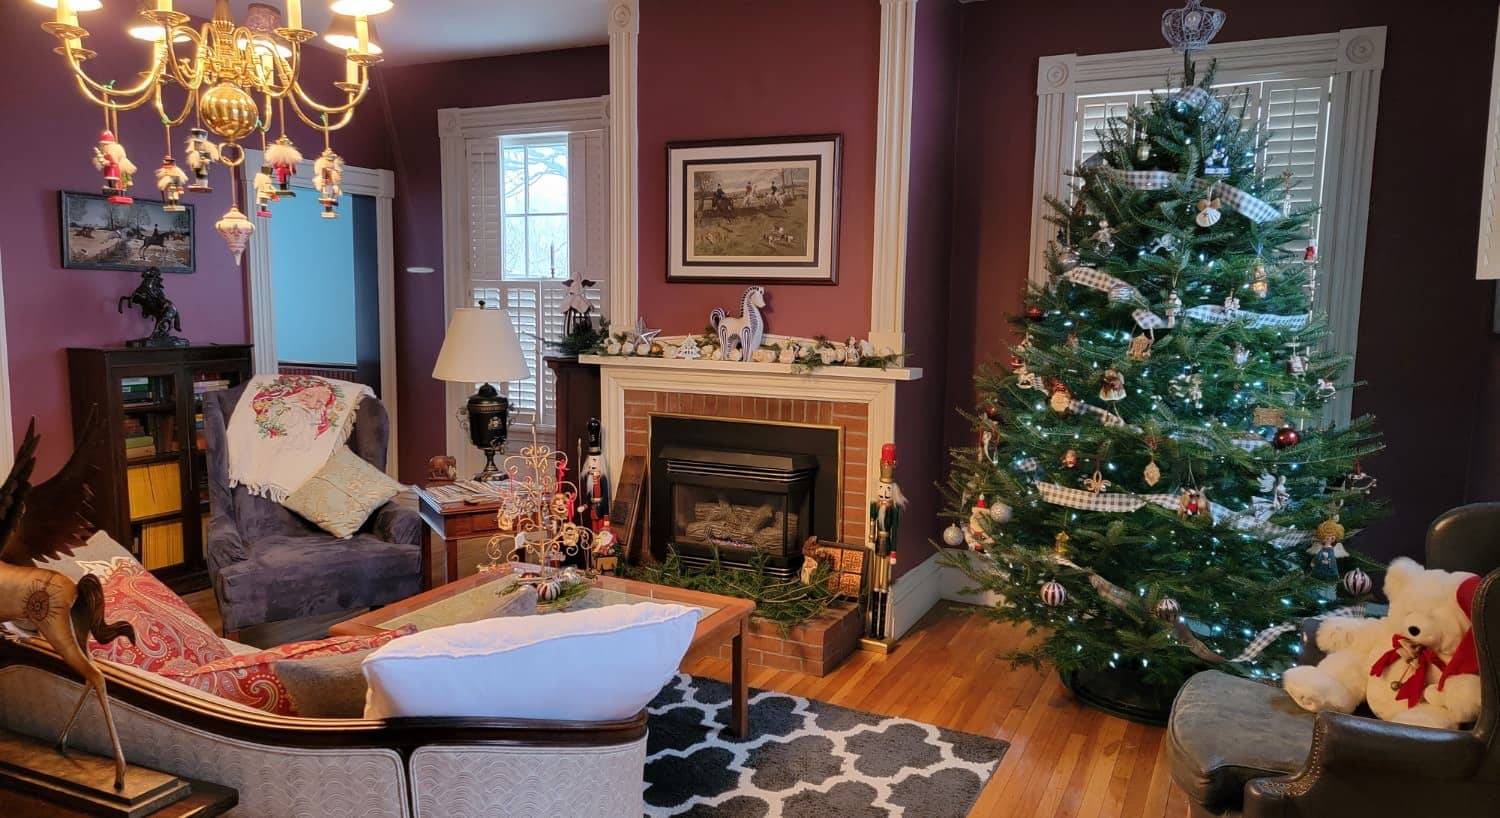 Living room with hardwood flooring, red walls, white trim, fireplace, and decorated Christmas tree